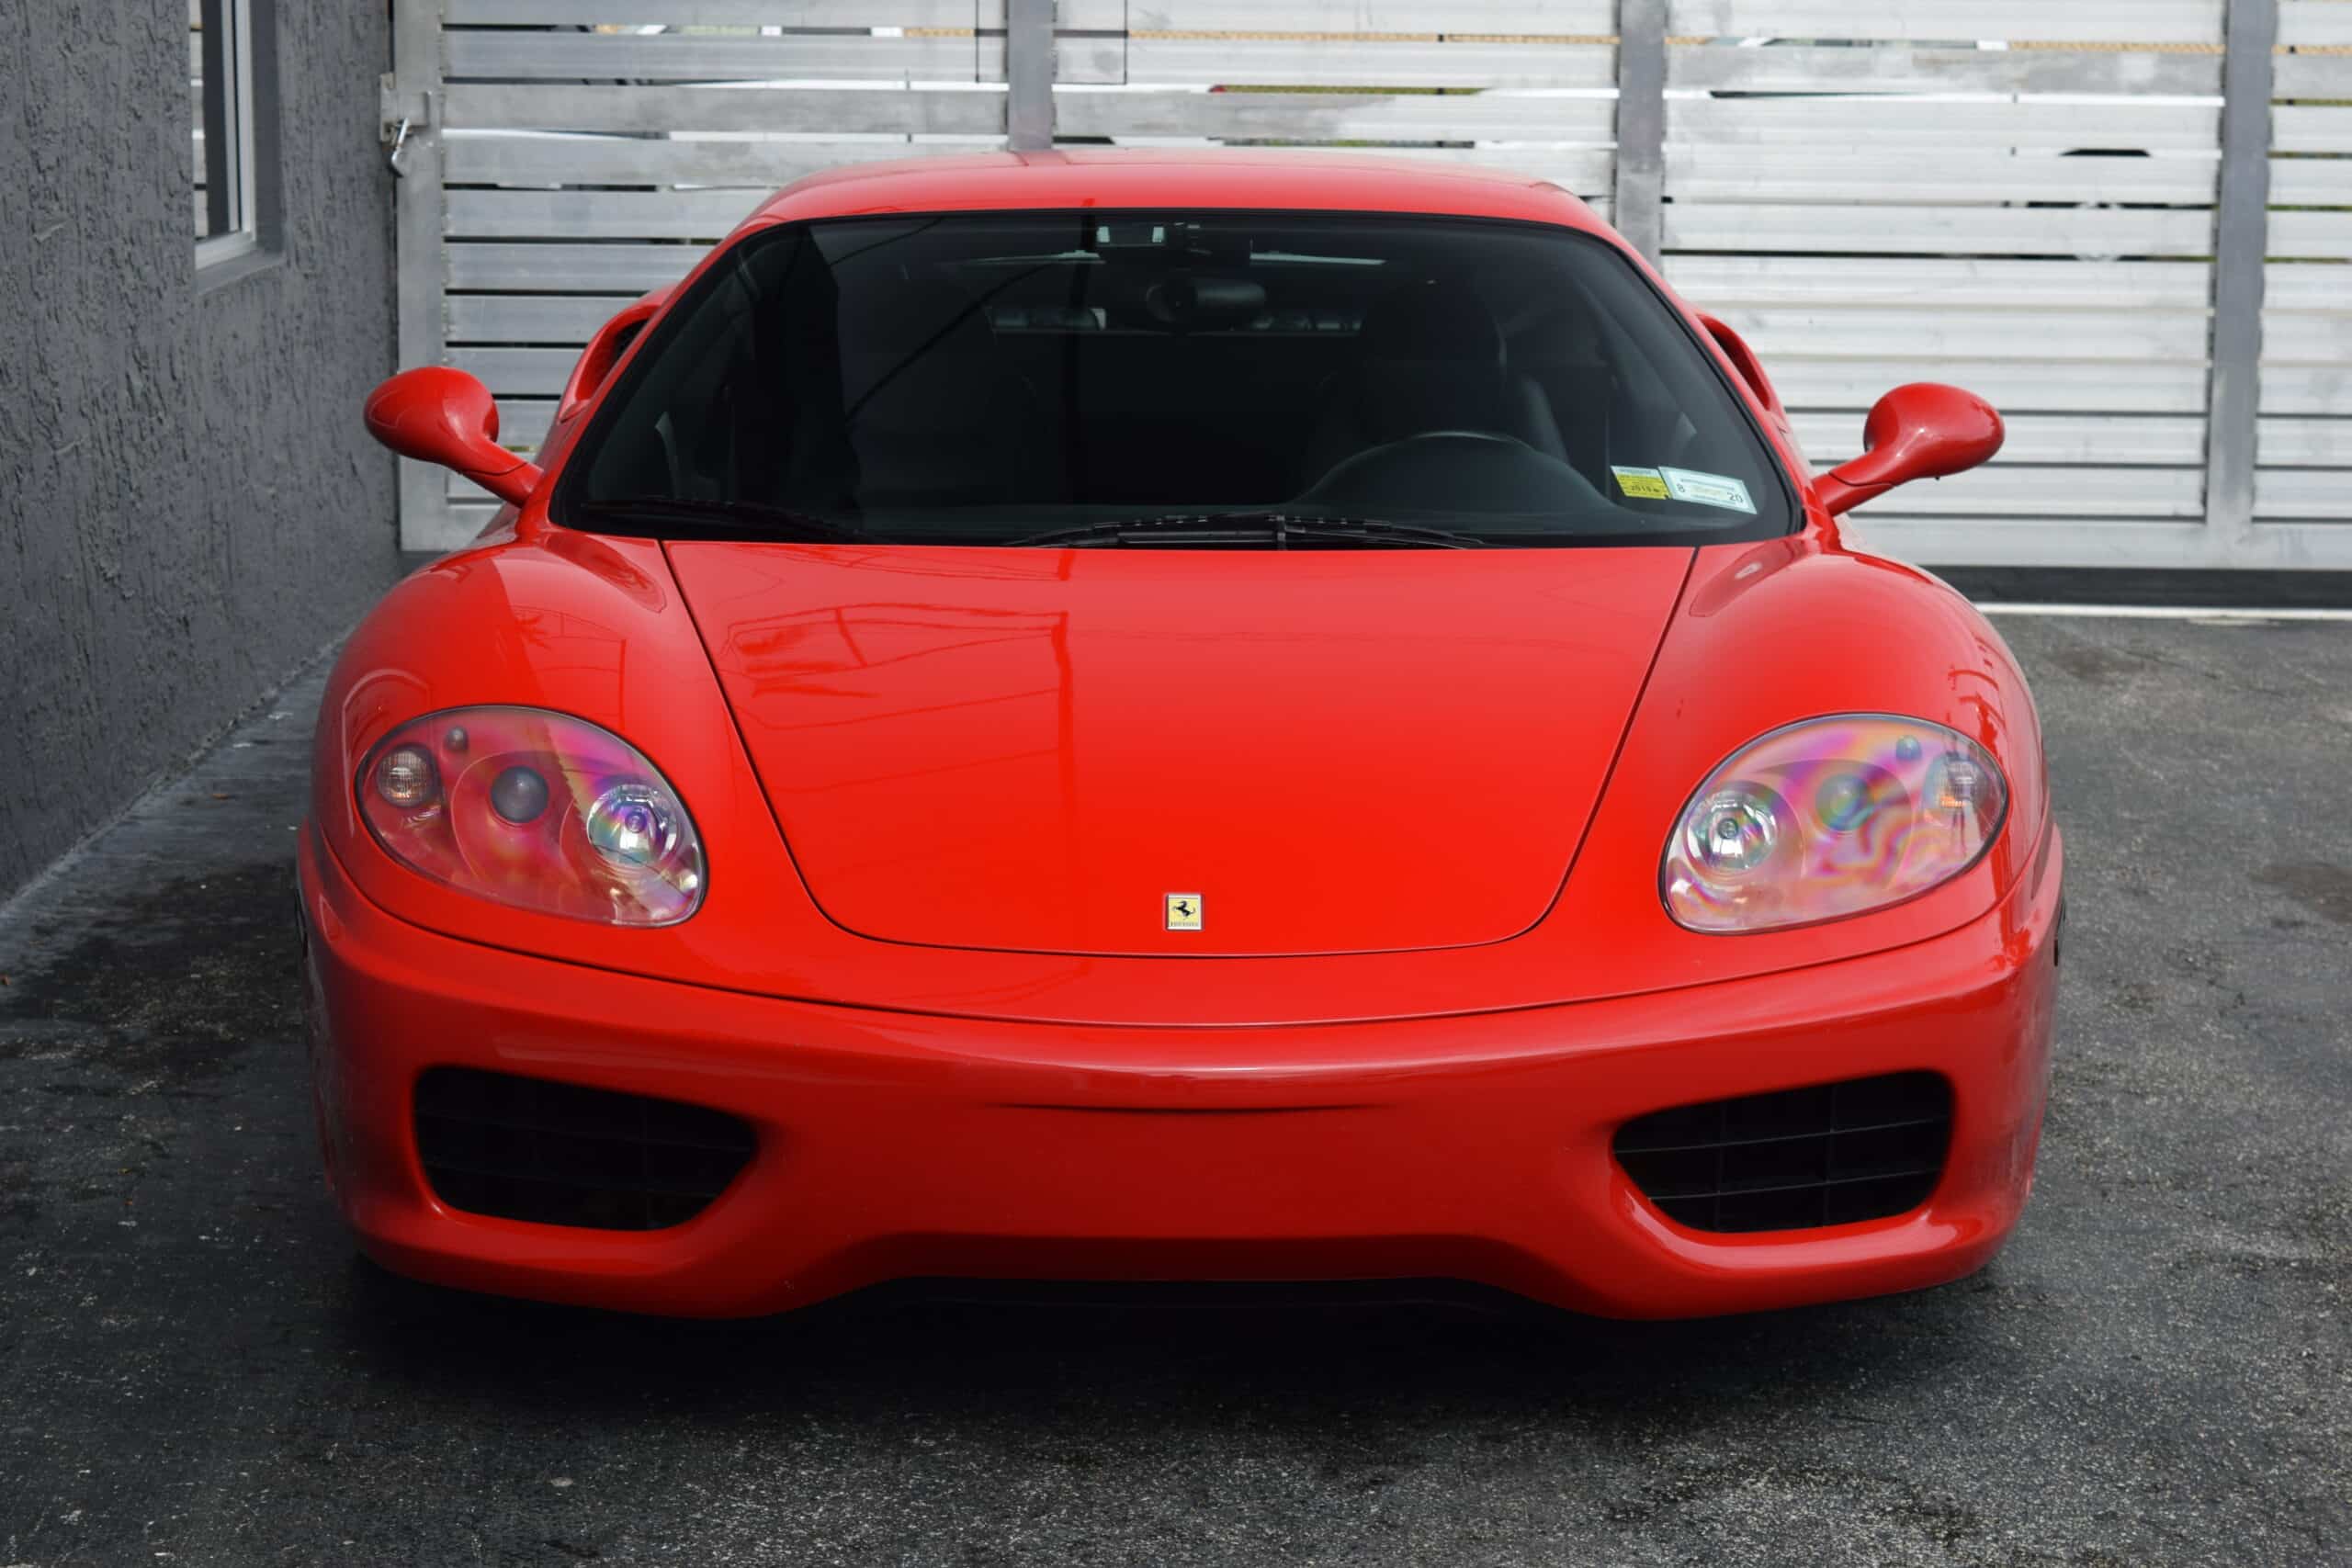 1999 Ferrari 360 Modena Coupe 6-Speed Gated 6-Speed! low miles, Challenge Stradale Wheels and Grille, current belt